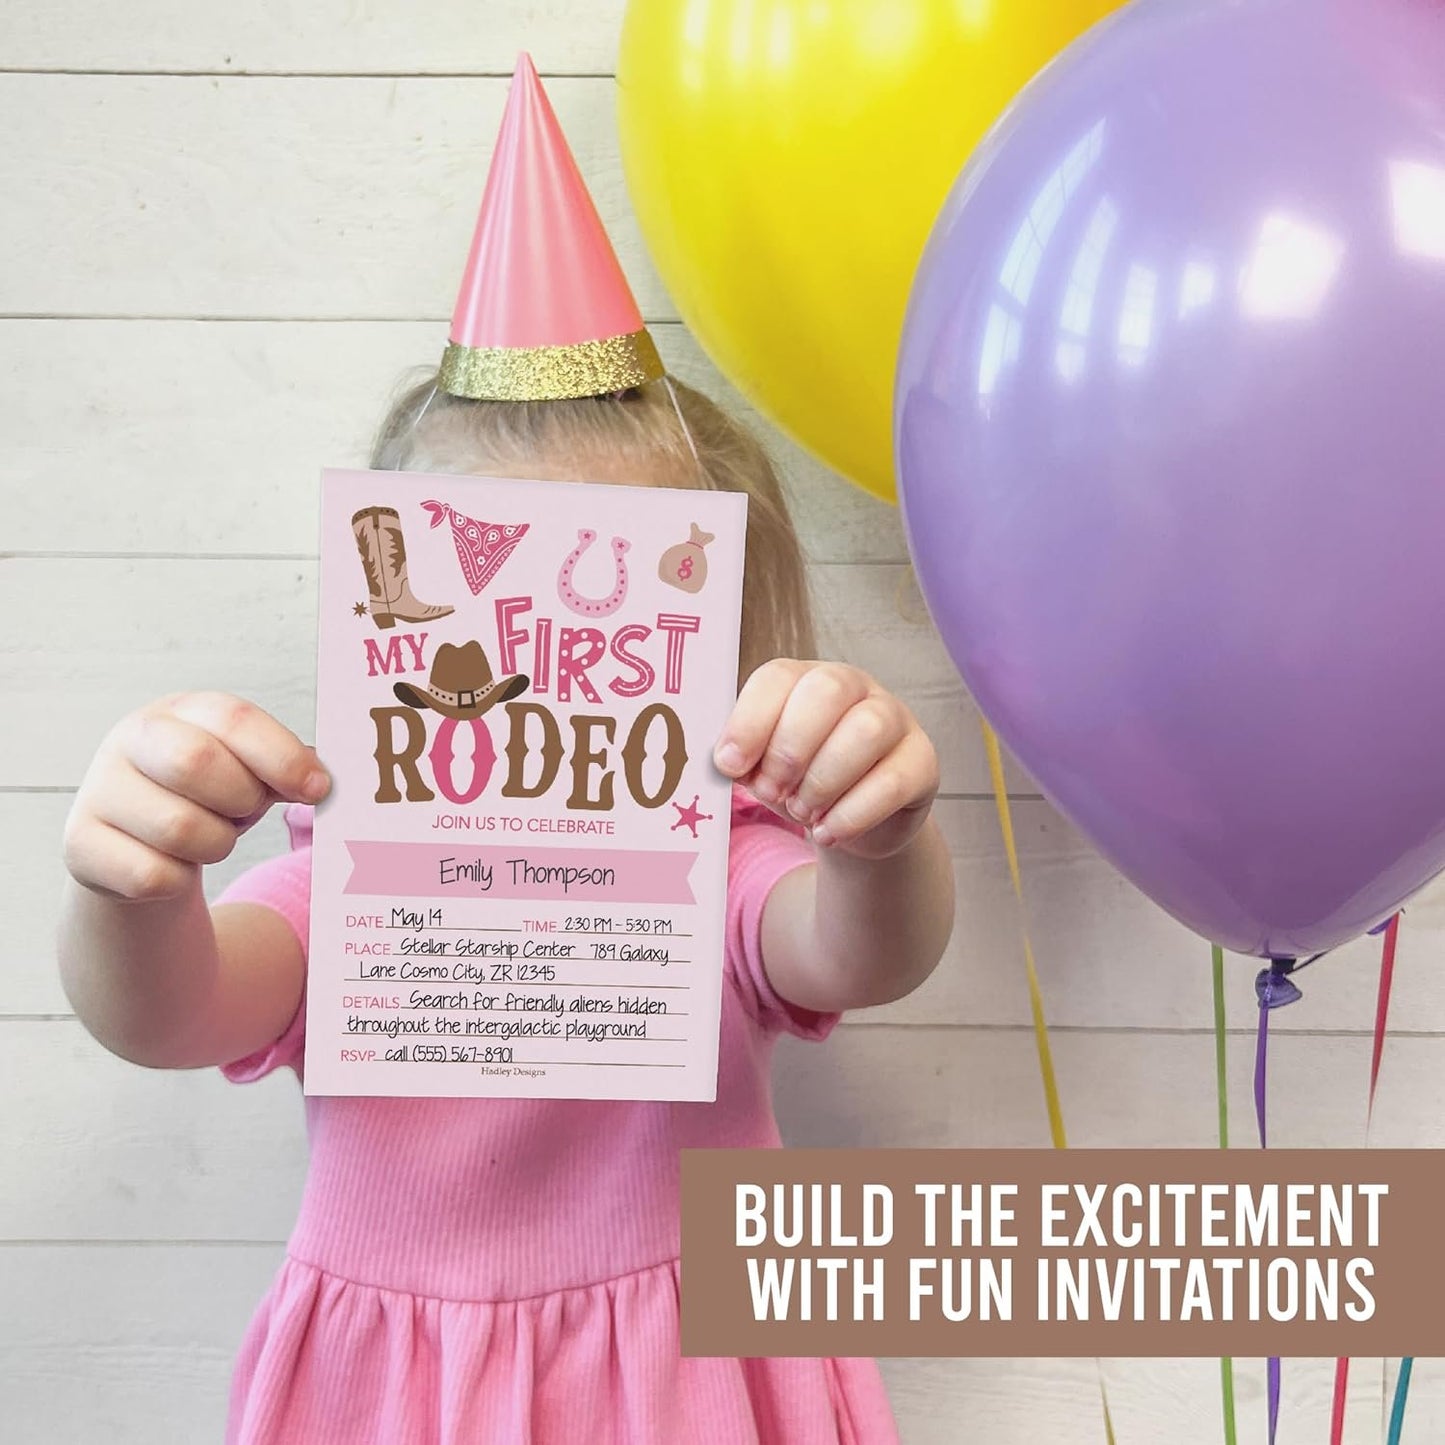 15 My First Rodeo Birthday Invitations Girl - 1st Rodeo Birthday Party Invitations For Girls, Western Invitations For Birthday Party Invitation Girl, Invitation Cards, Kids Birthday Invitations